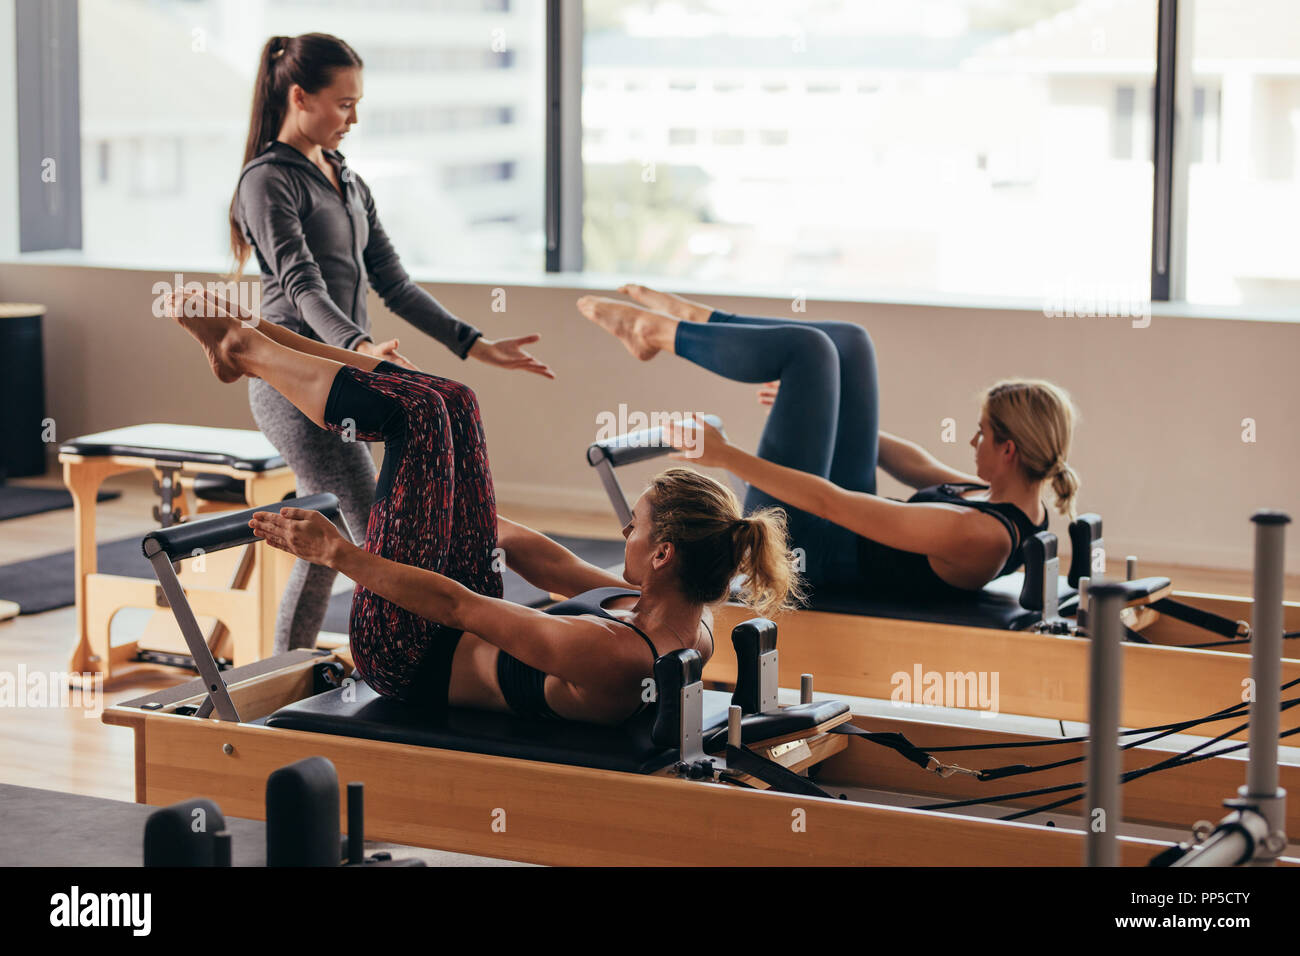 https://c8.alamy.com/comp/PP5CTY/women-doing-pilates-exercises-lying-on-pilates-workout-machines-while-their-trainer-guides-them-two-fitness-women-being-trained-by-a-pilates-instruct-PP5CTY.jpg